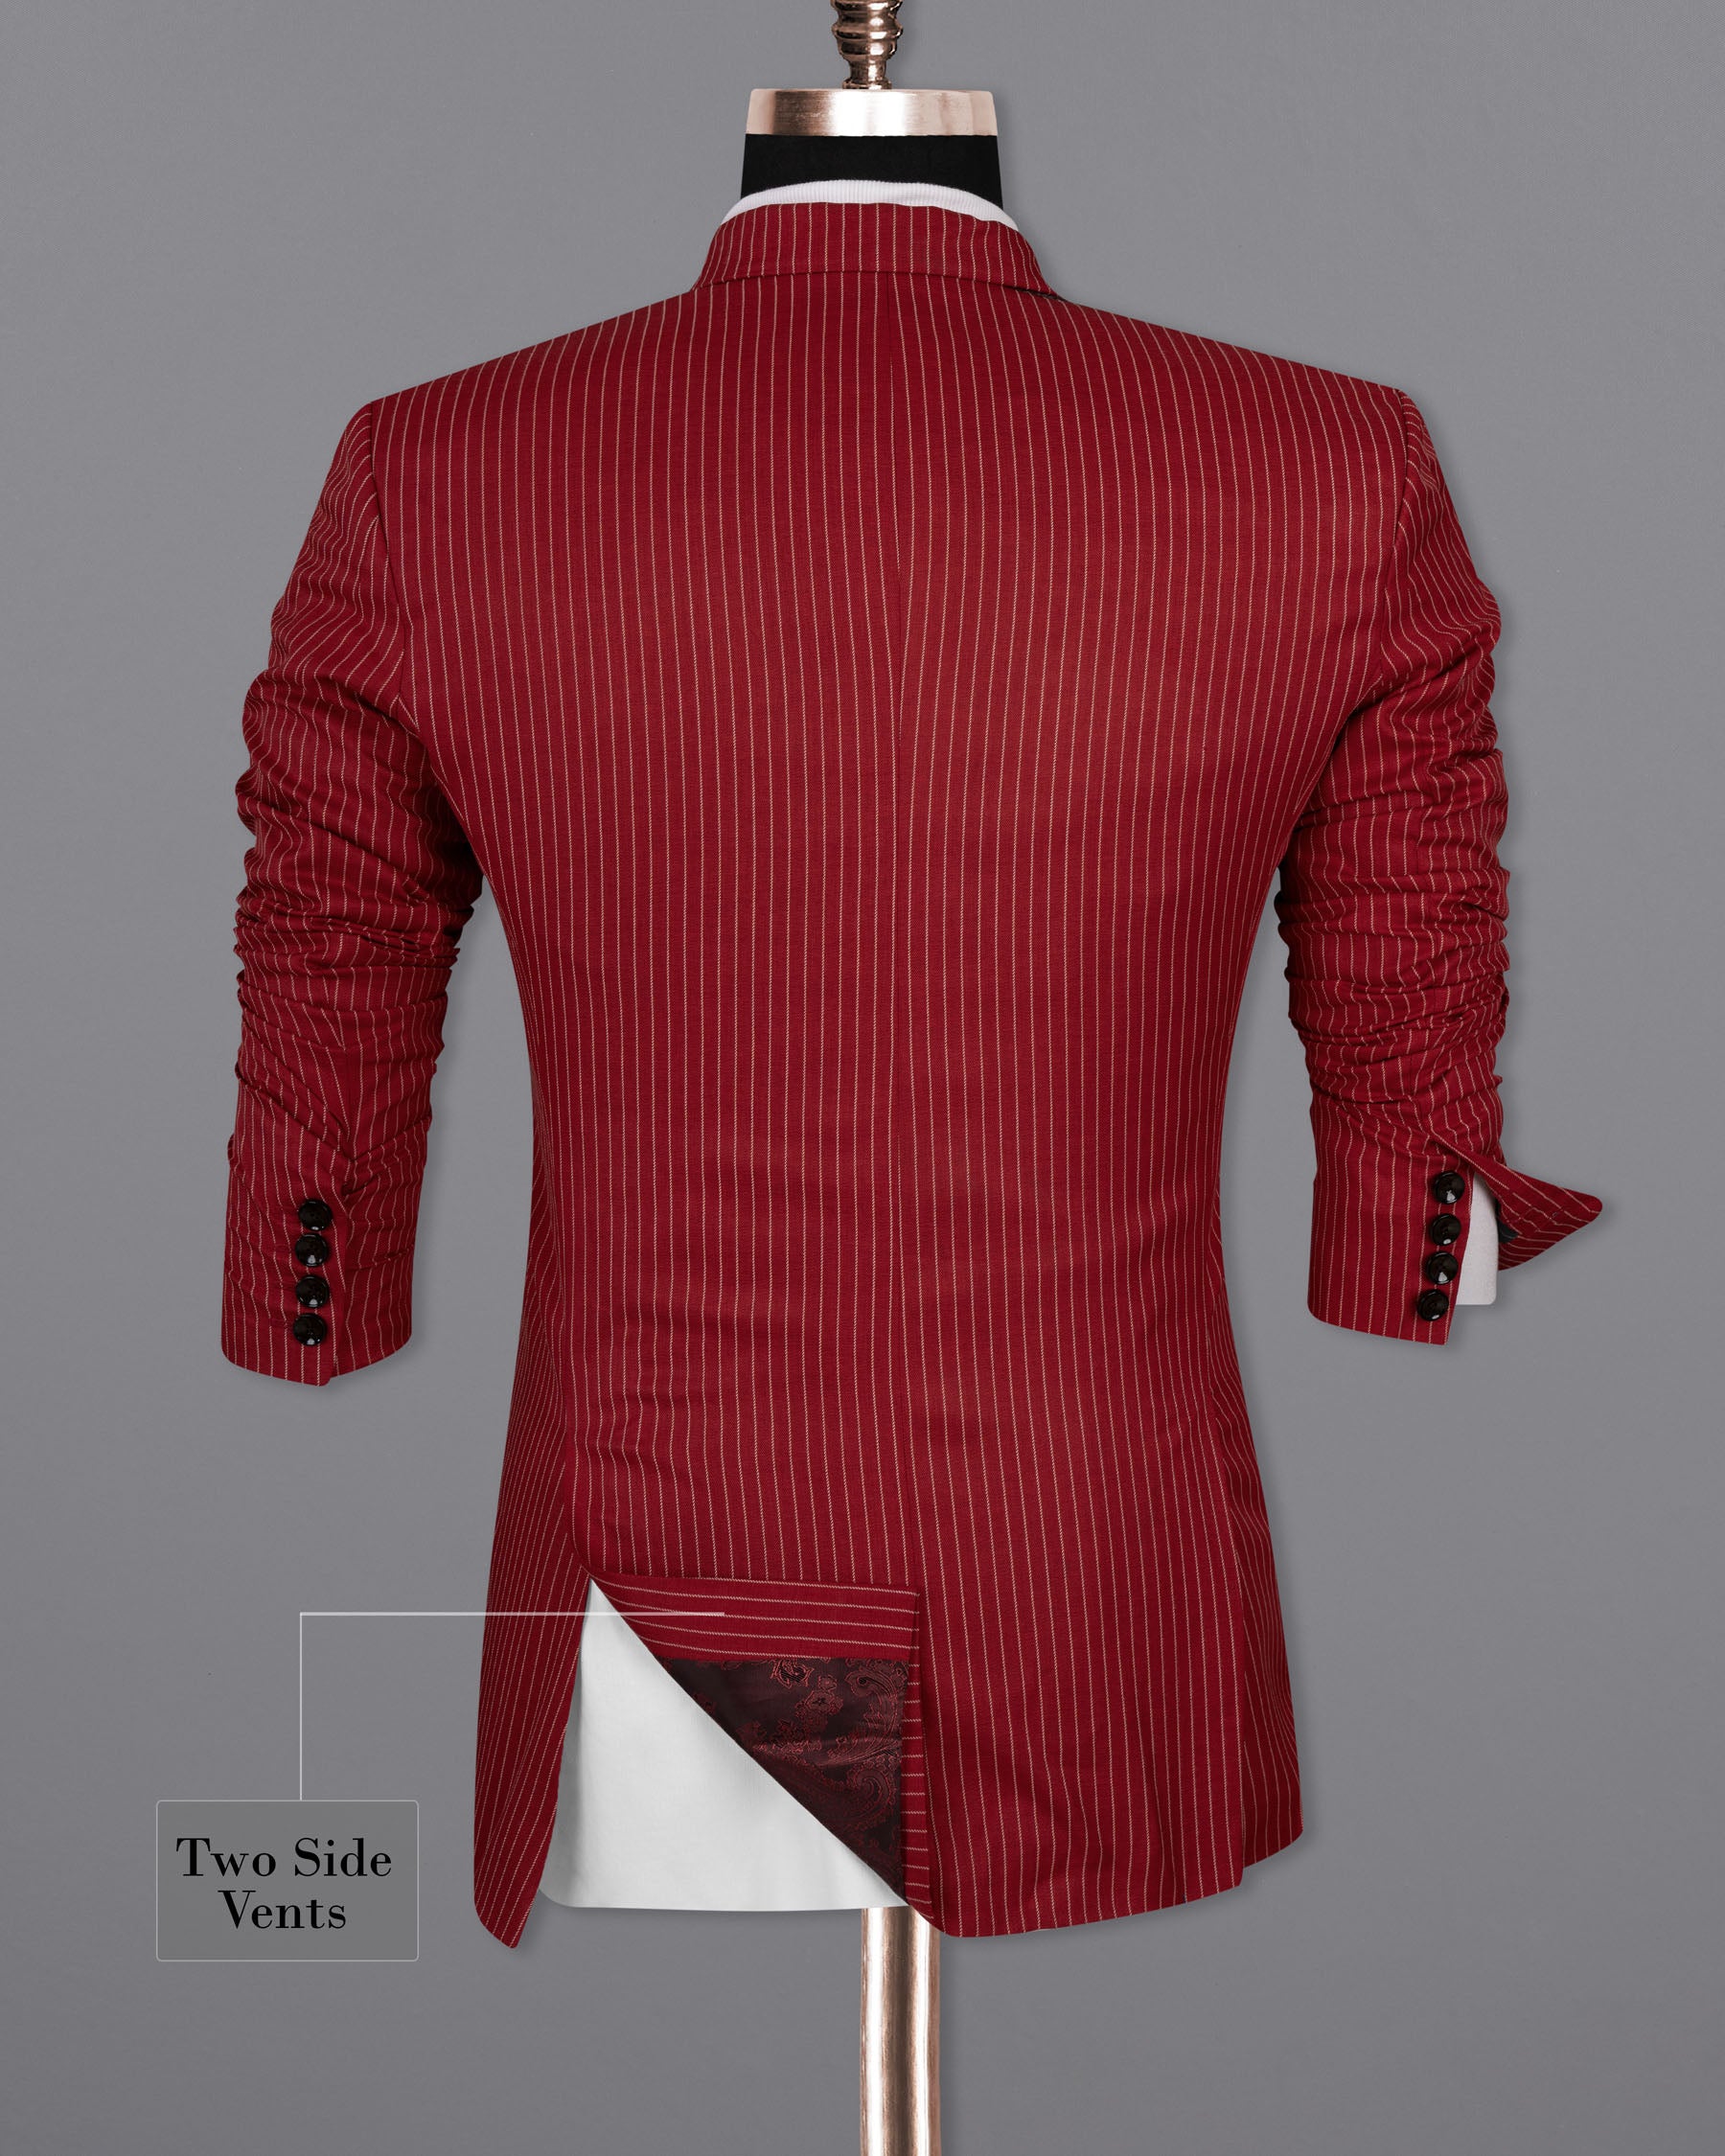 Merlot Red Striped Wool Rich DouSTe-Breasted Sports Suit ST1506-DB-PP-36, ST1506-DB-PP-38, ST1506-DB-PP-40, ST1506-DB-PP-42, ST1506-DB-PP-44, ST1506-DB-PP-46, ST1506-DB-PP-48, ST1506-DB-PP-50, ST1506-DB-PP-52, ST1506-DB-PP-54, ST1506-DB-PP-56, ST1506-DB-PP-58, ST1506-DB-PP-60